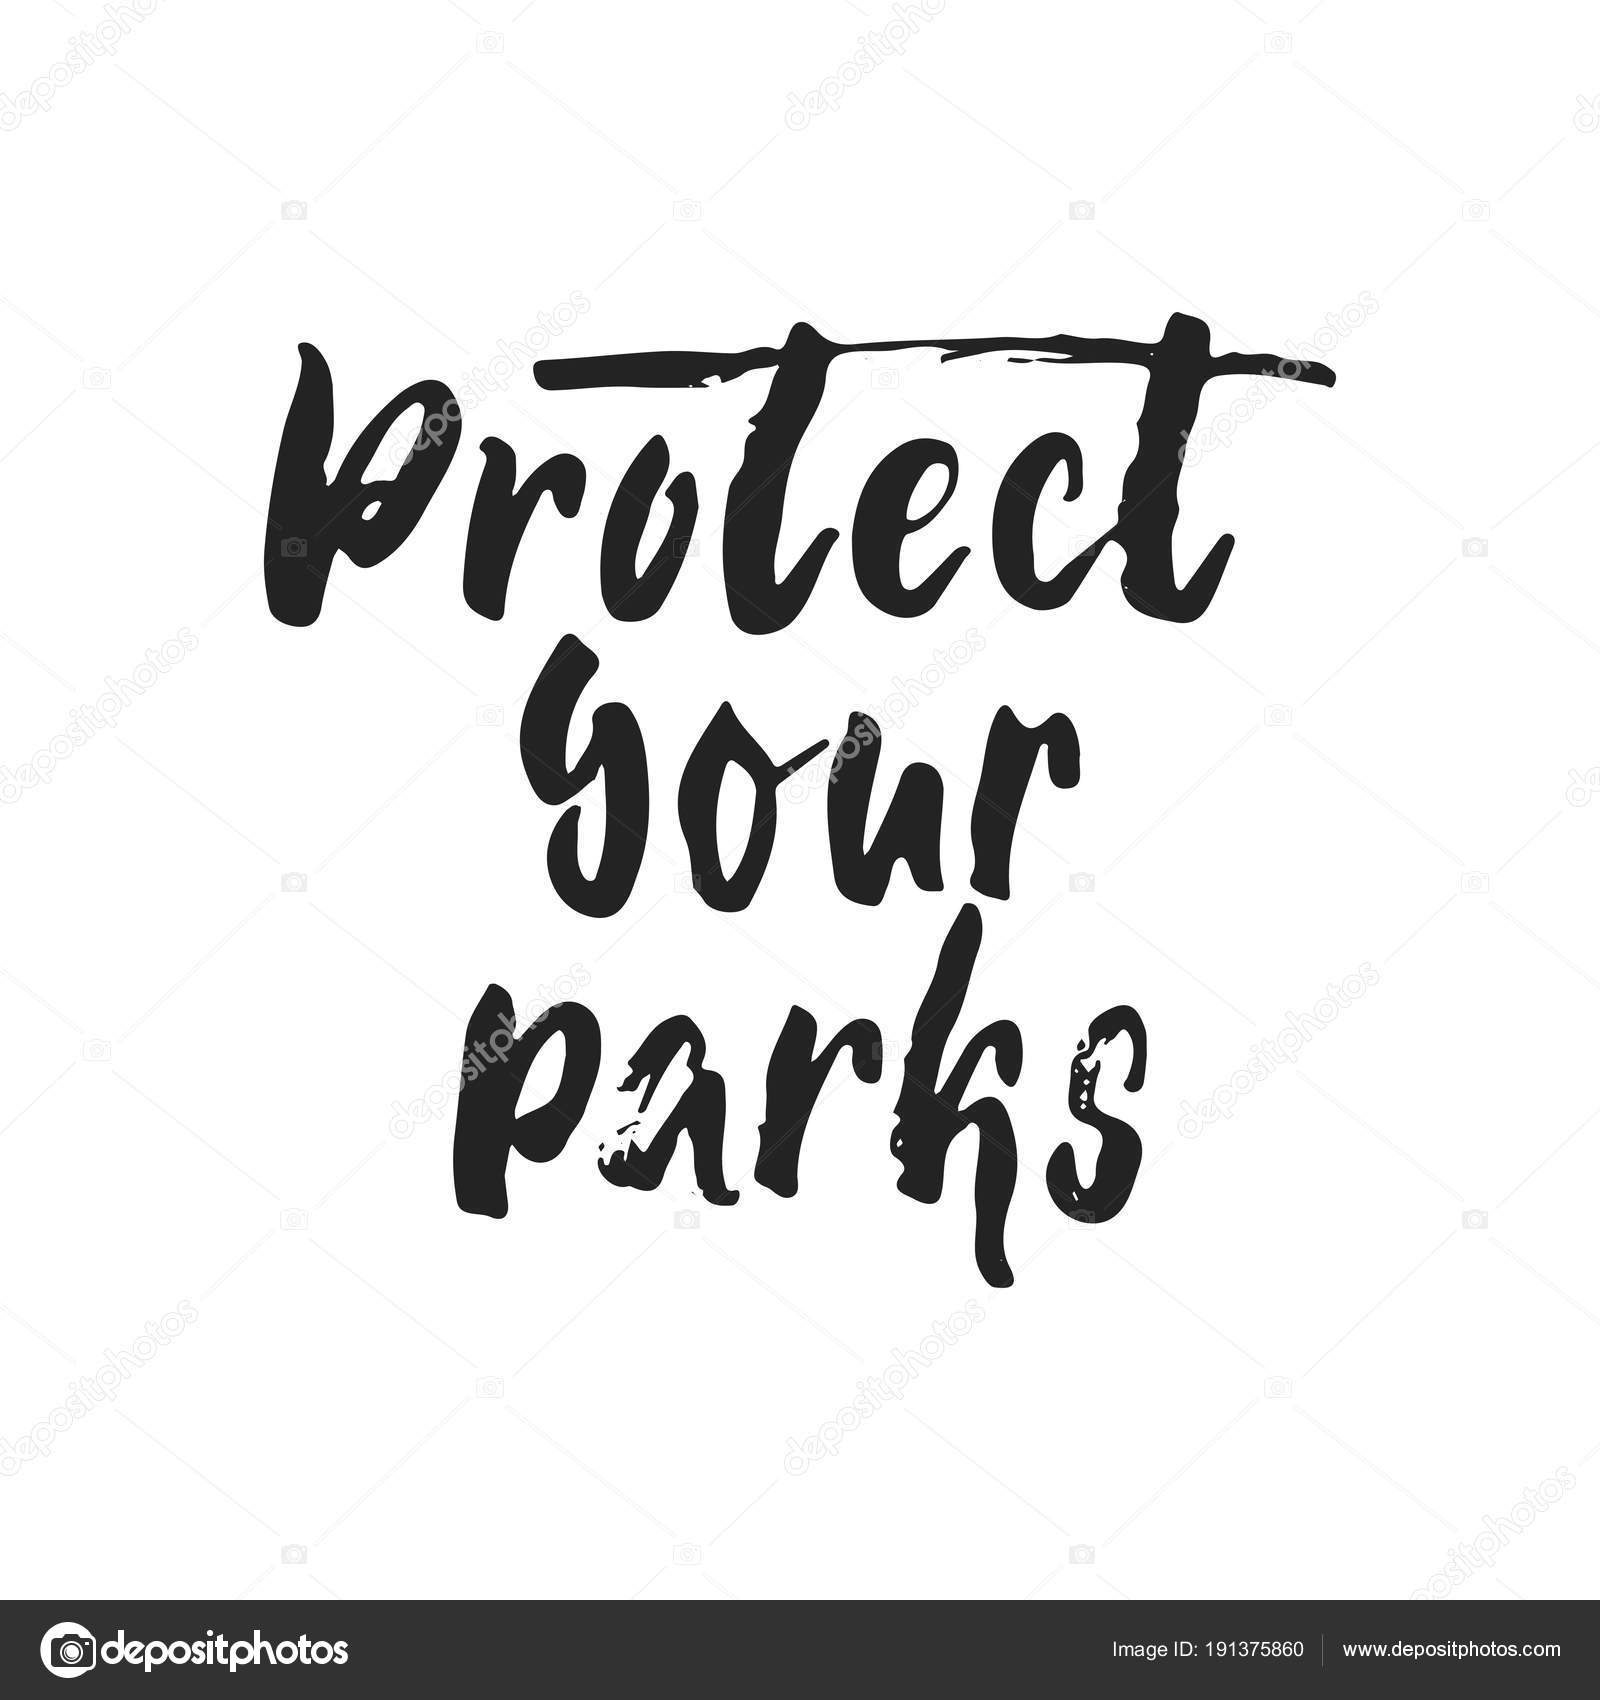 Protect your parks hand drawn ecology lettering phrase isolated on the black background Fun brush ink vector illustration for banners greeting card